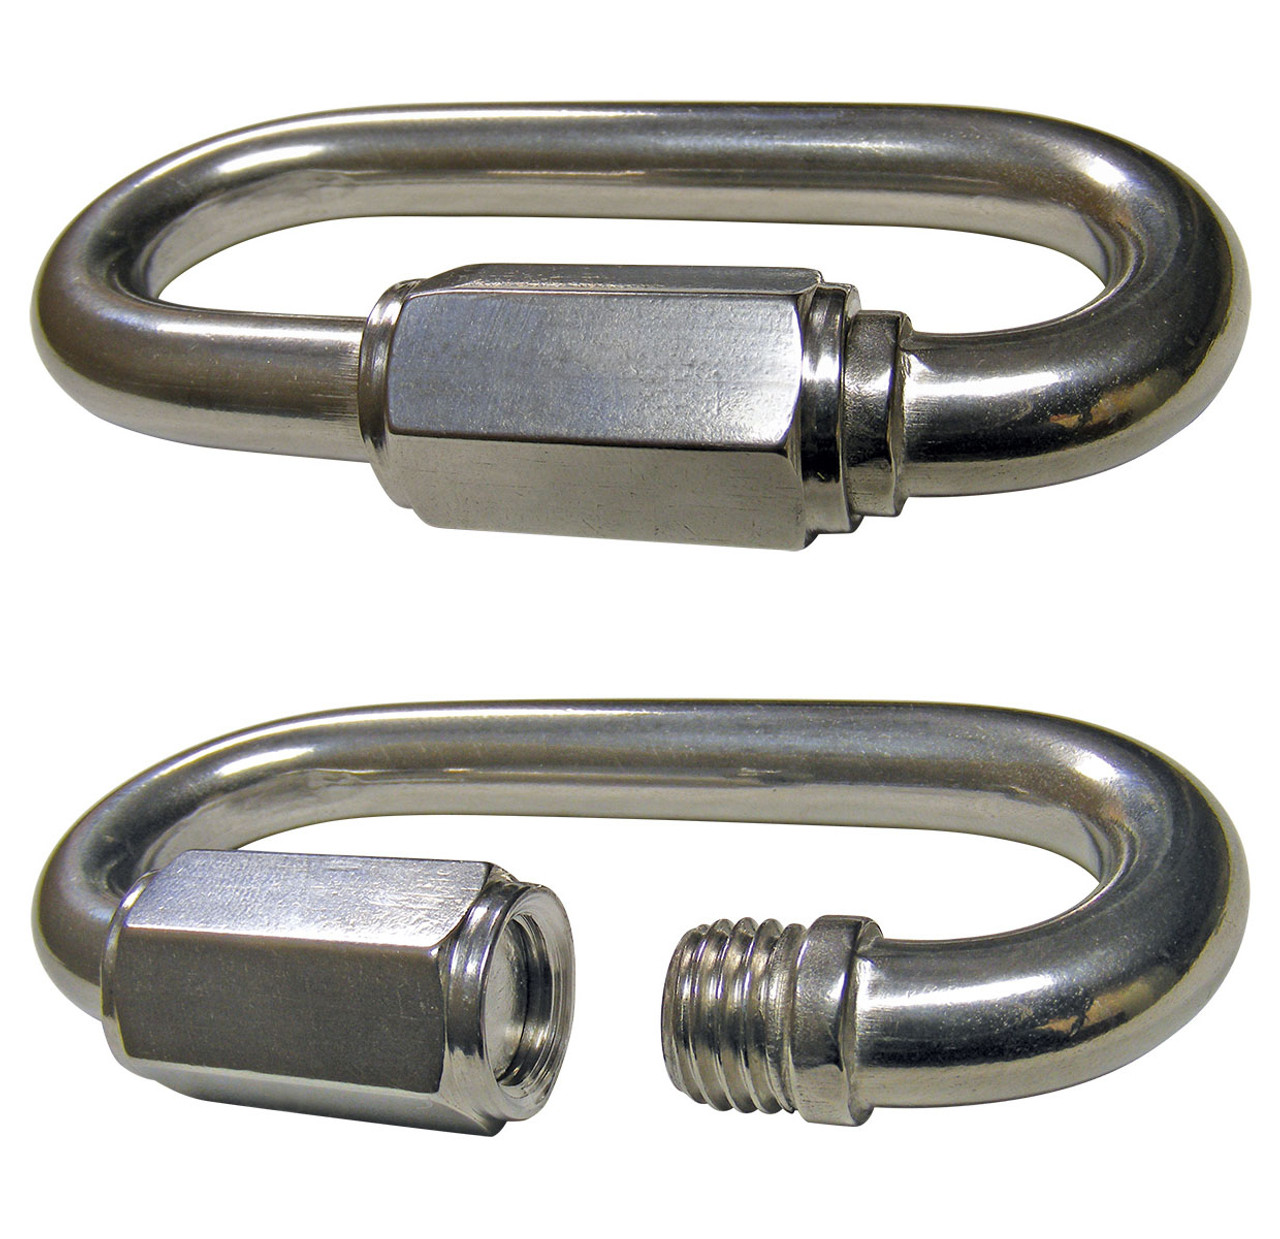 U.S. Made Stainless Steel Quick Link / Carabiner by American Flags Express